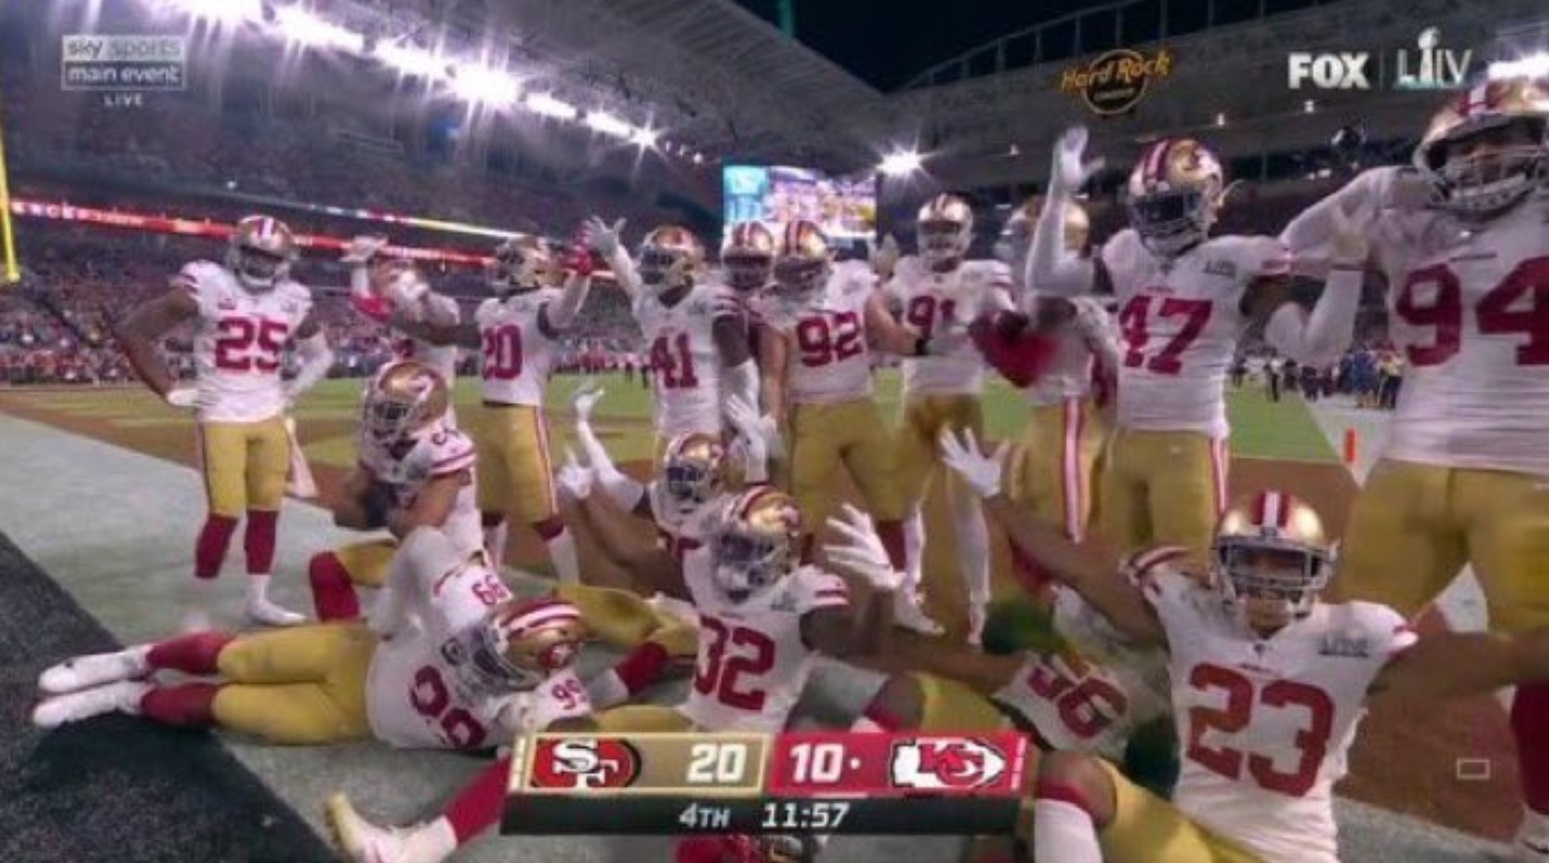 PHOTO 49ers Celebated Like They Already Won Super Bowl By Posing For Picture In End Zone With 12 Minutes Left In 4th Quarter